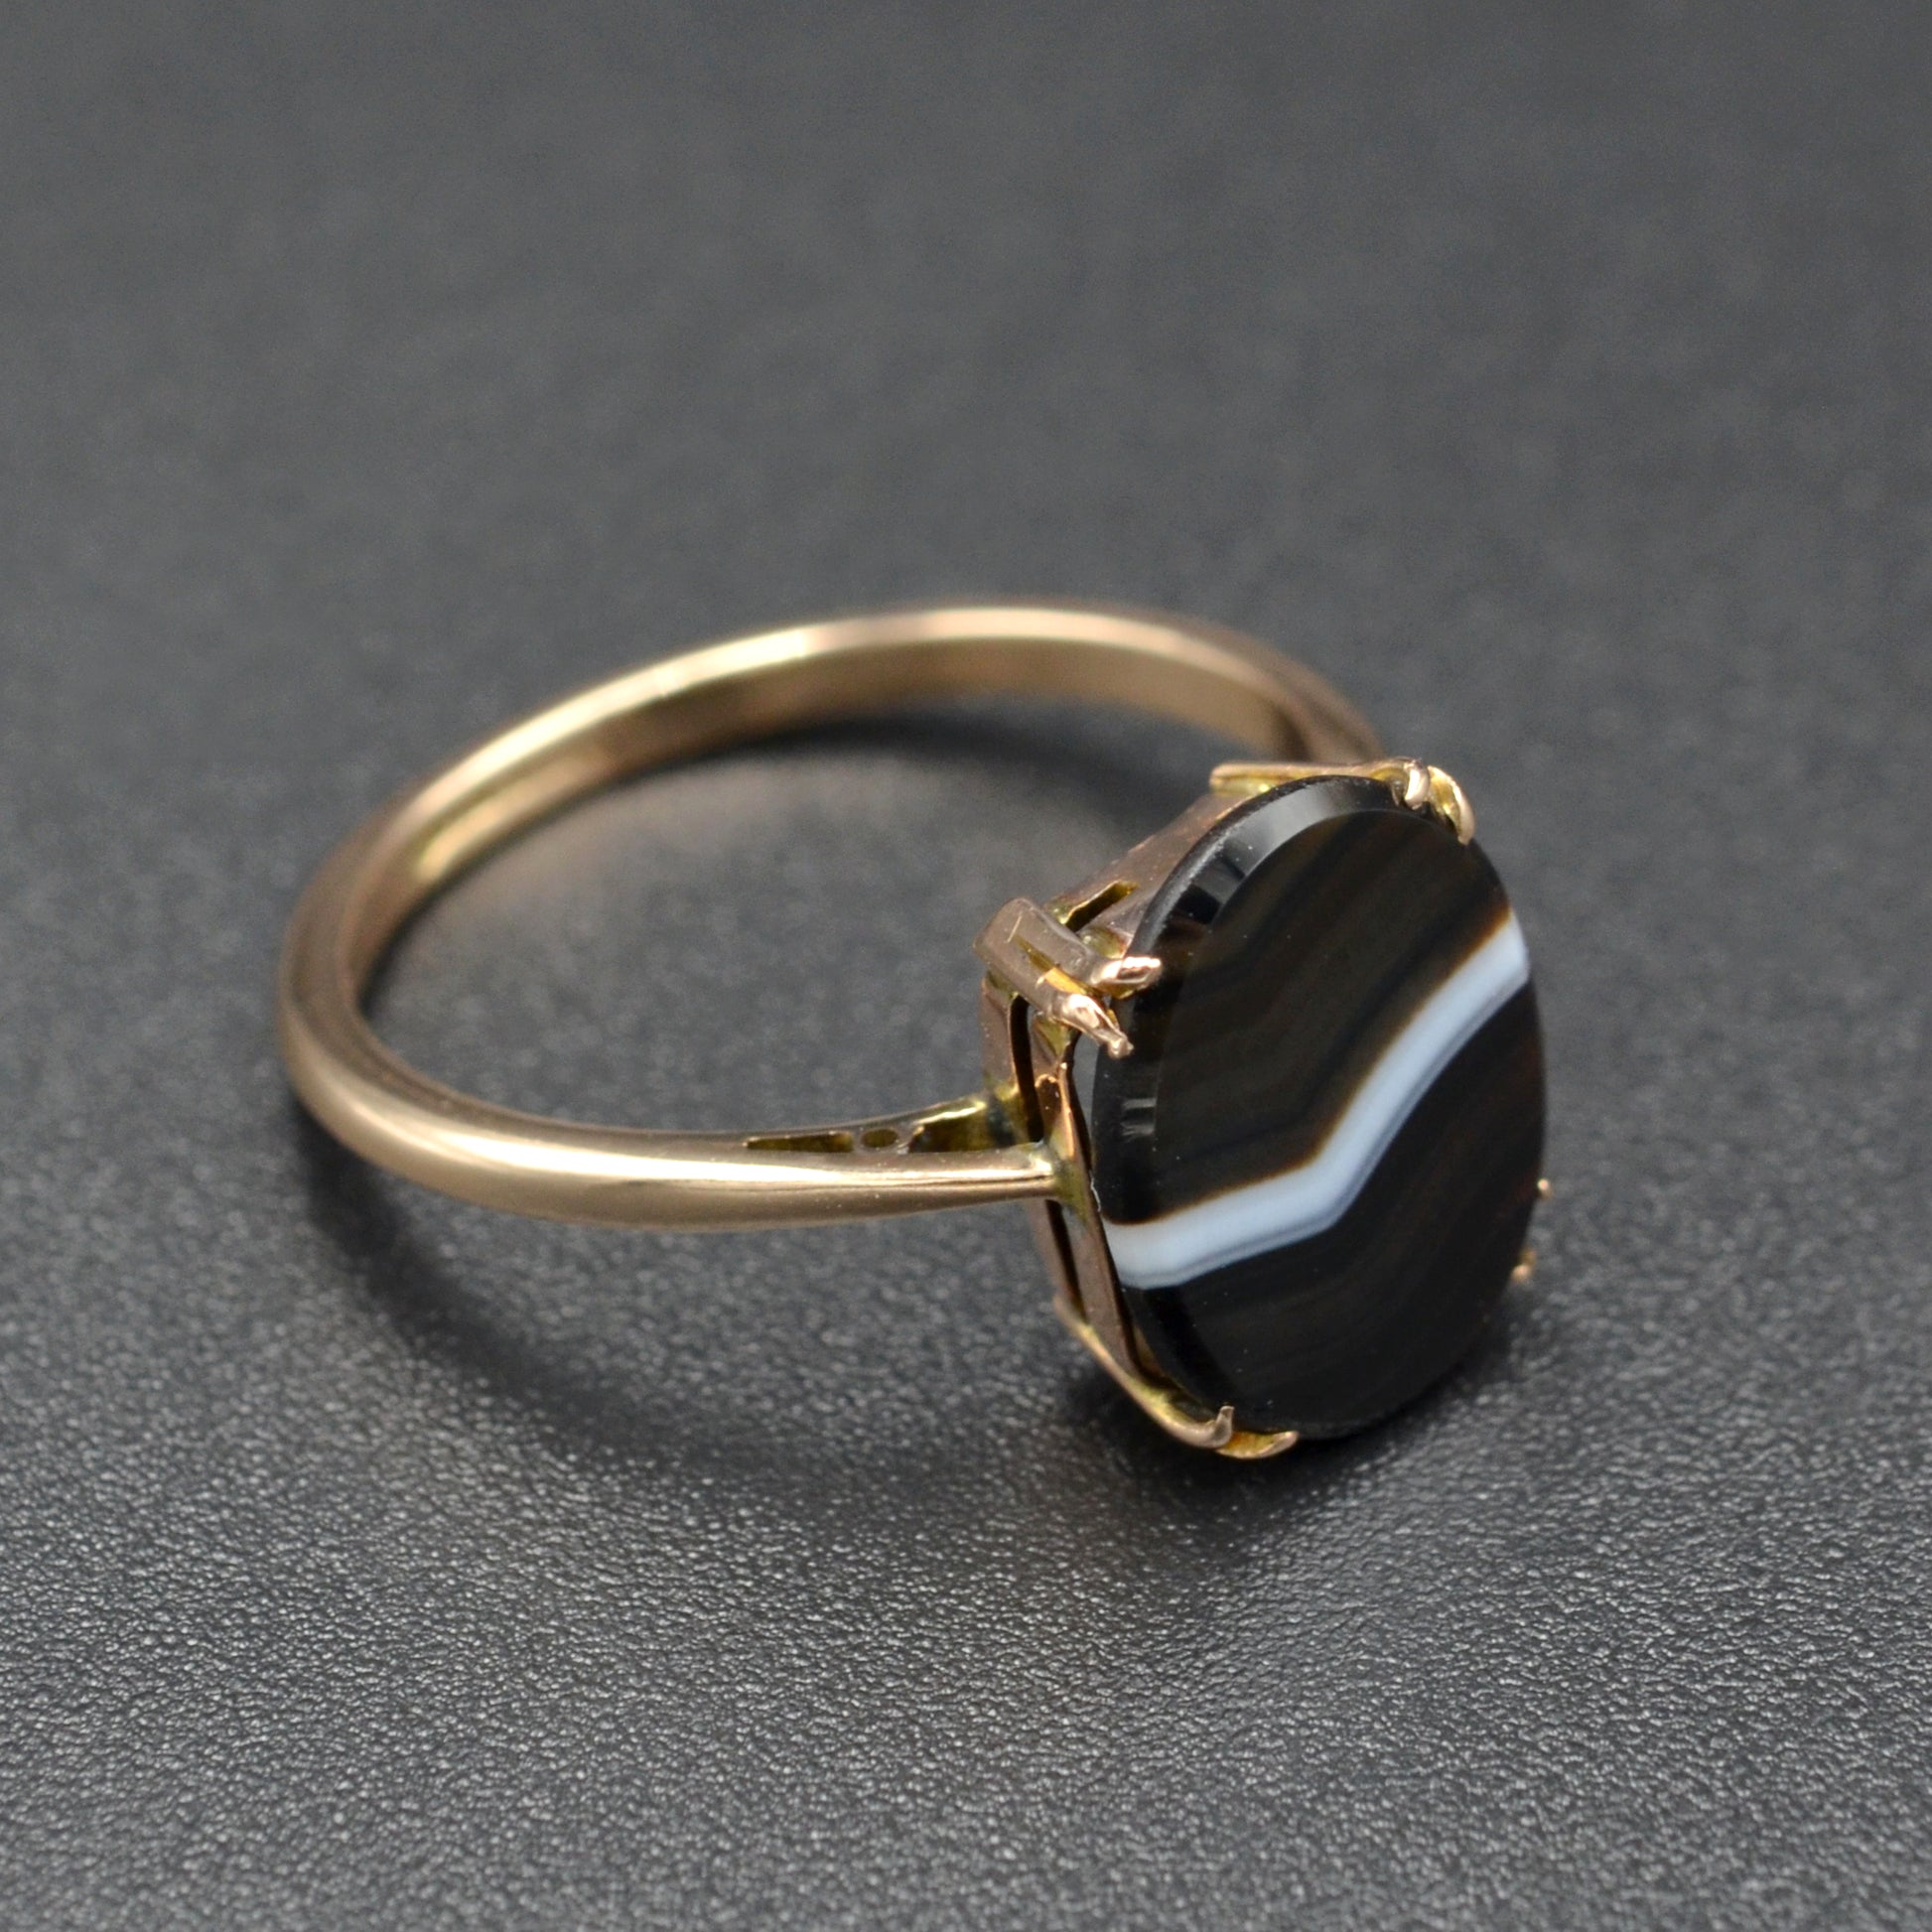 Antique Banded Agate and 9K Gold Ring